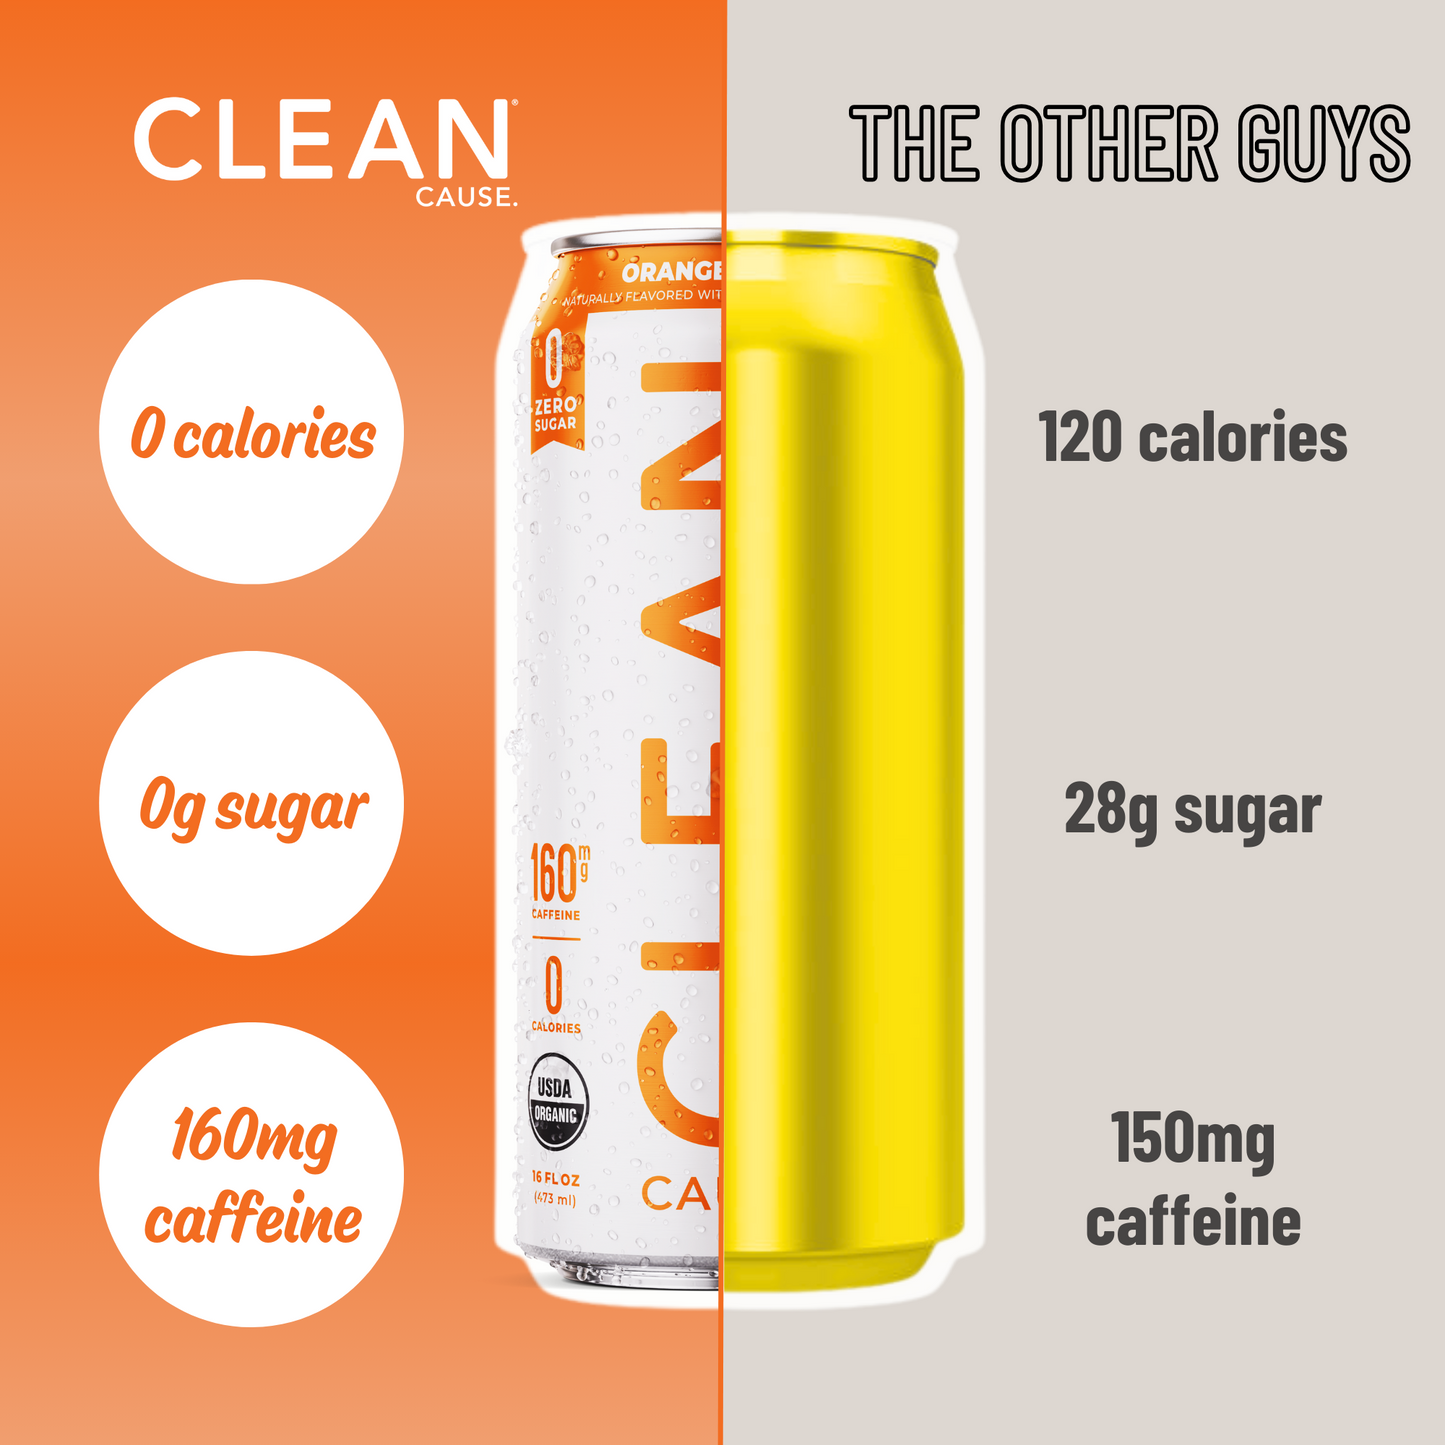 A can split between CLEAN Orange Ginger Yerba Mate and "The Other Guys" showing CLEAN with 0 calories, 0g sugar, and 160mg caffeine and the other guys with 120 calories, 28g sugar, and 150mg caffeine